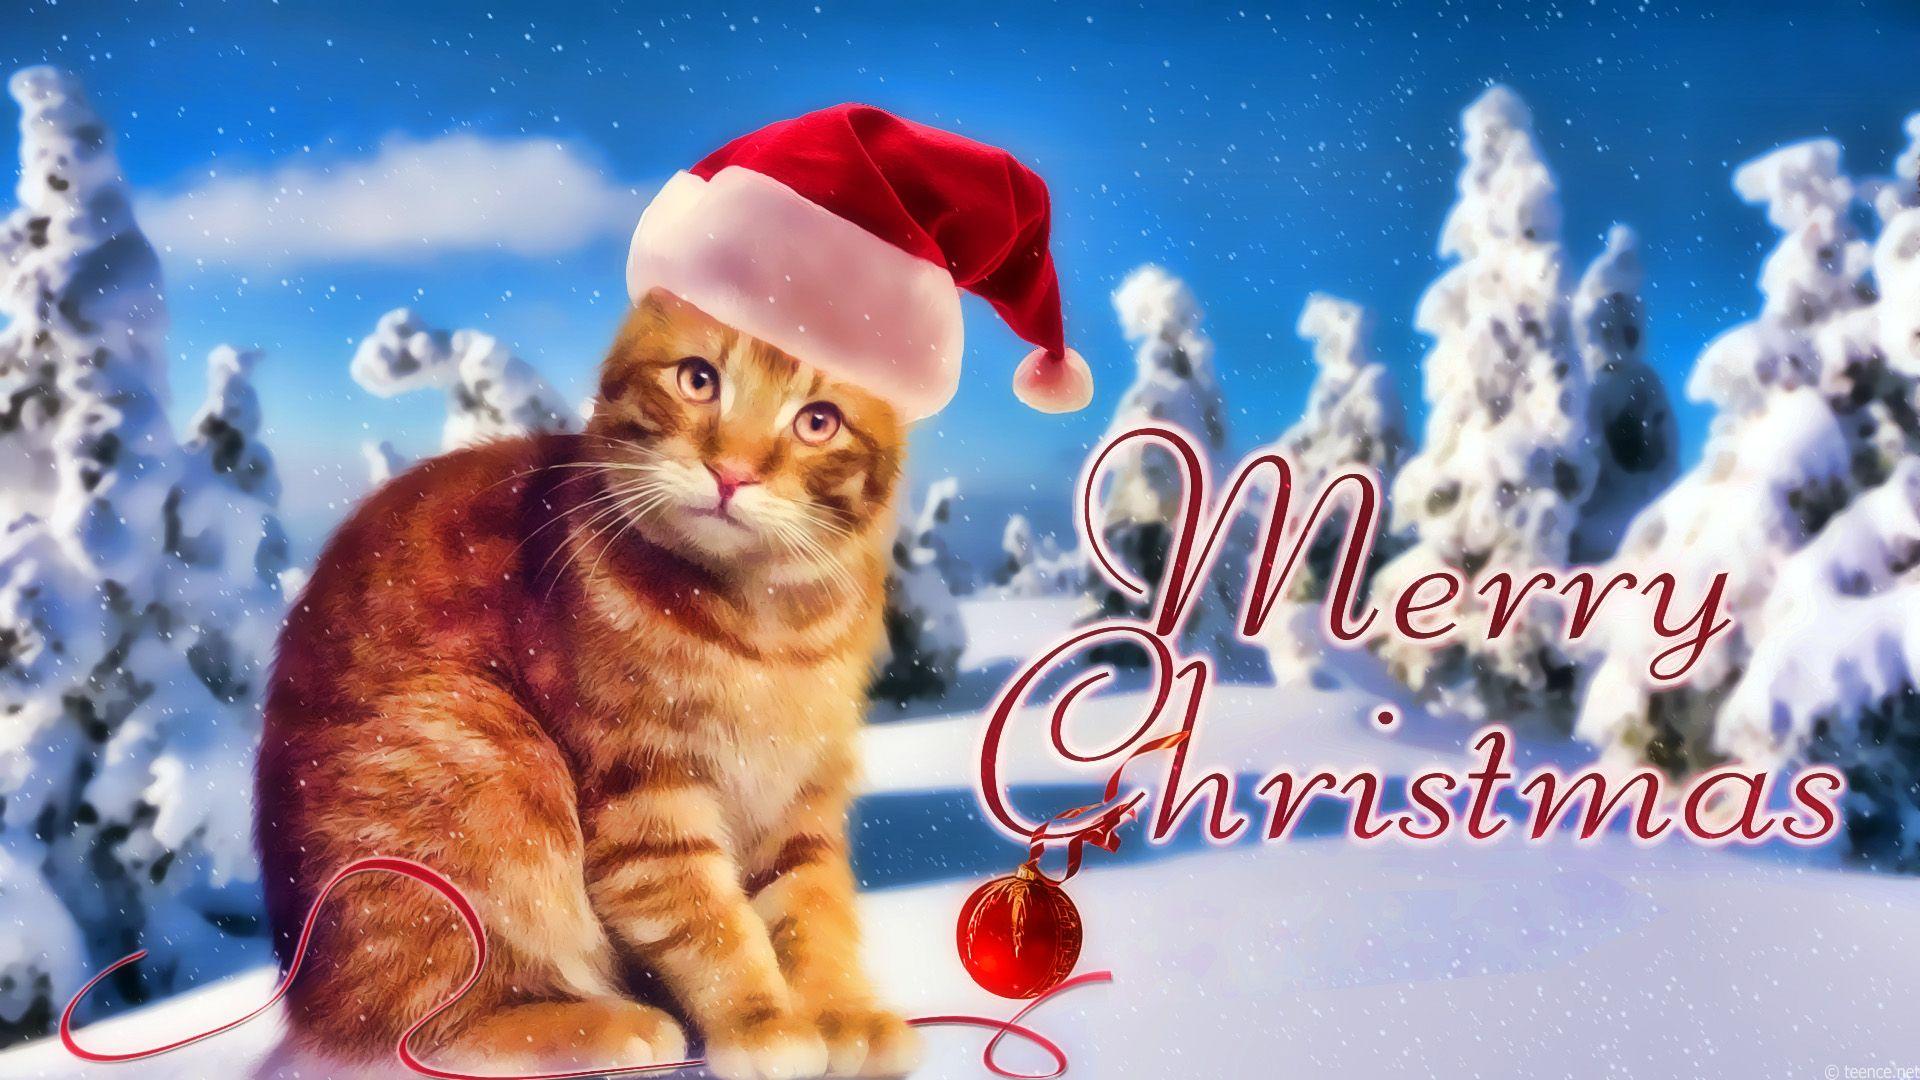 Free Christmas Cats wallpaper collection to decorate your desktops